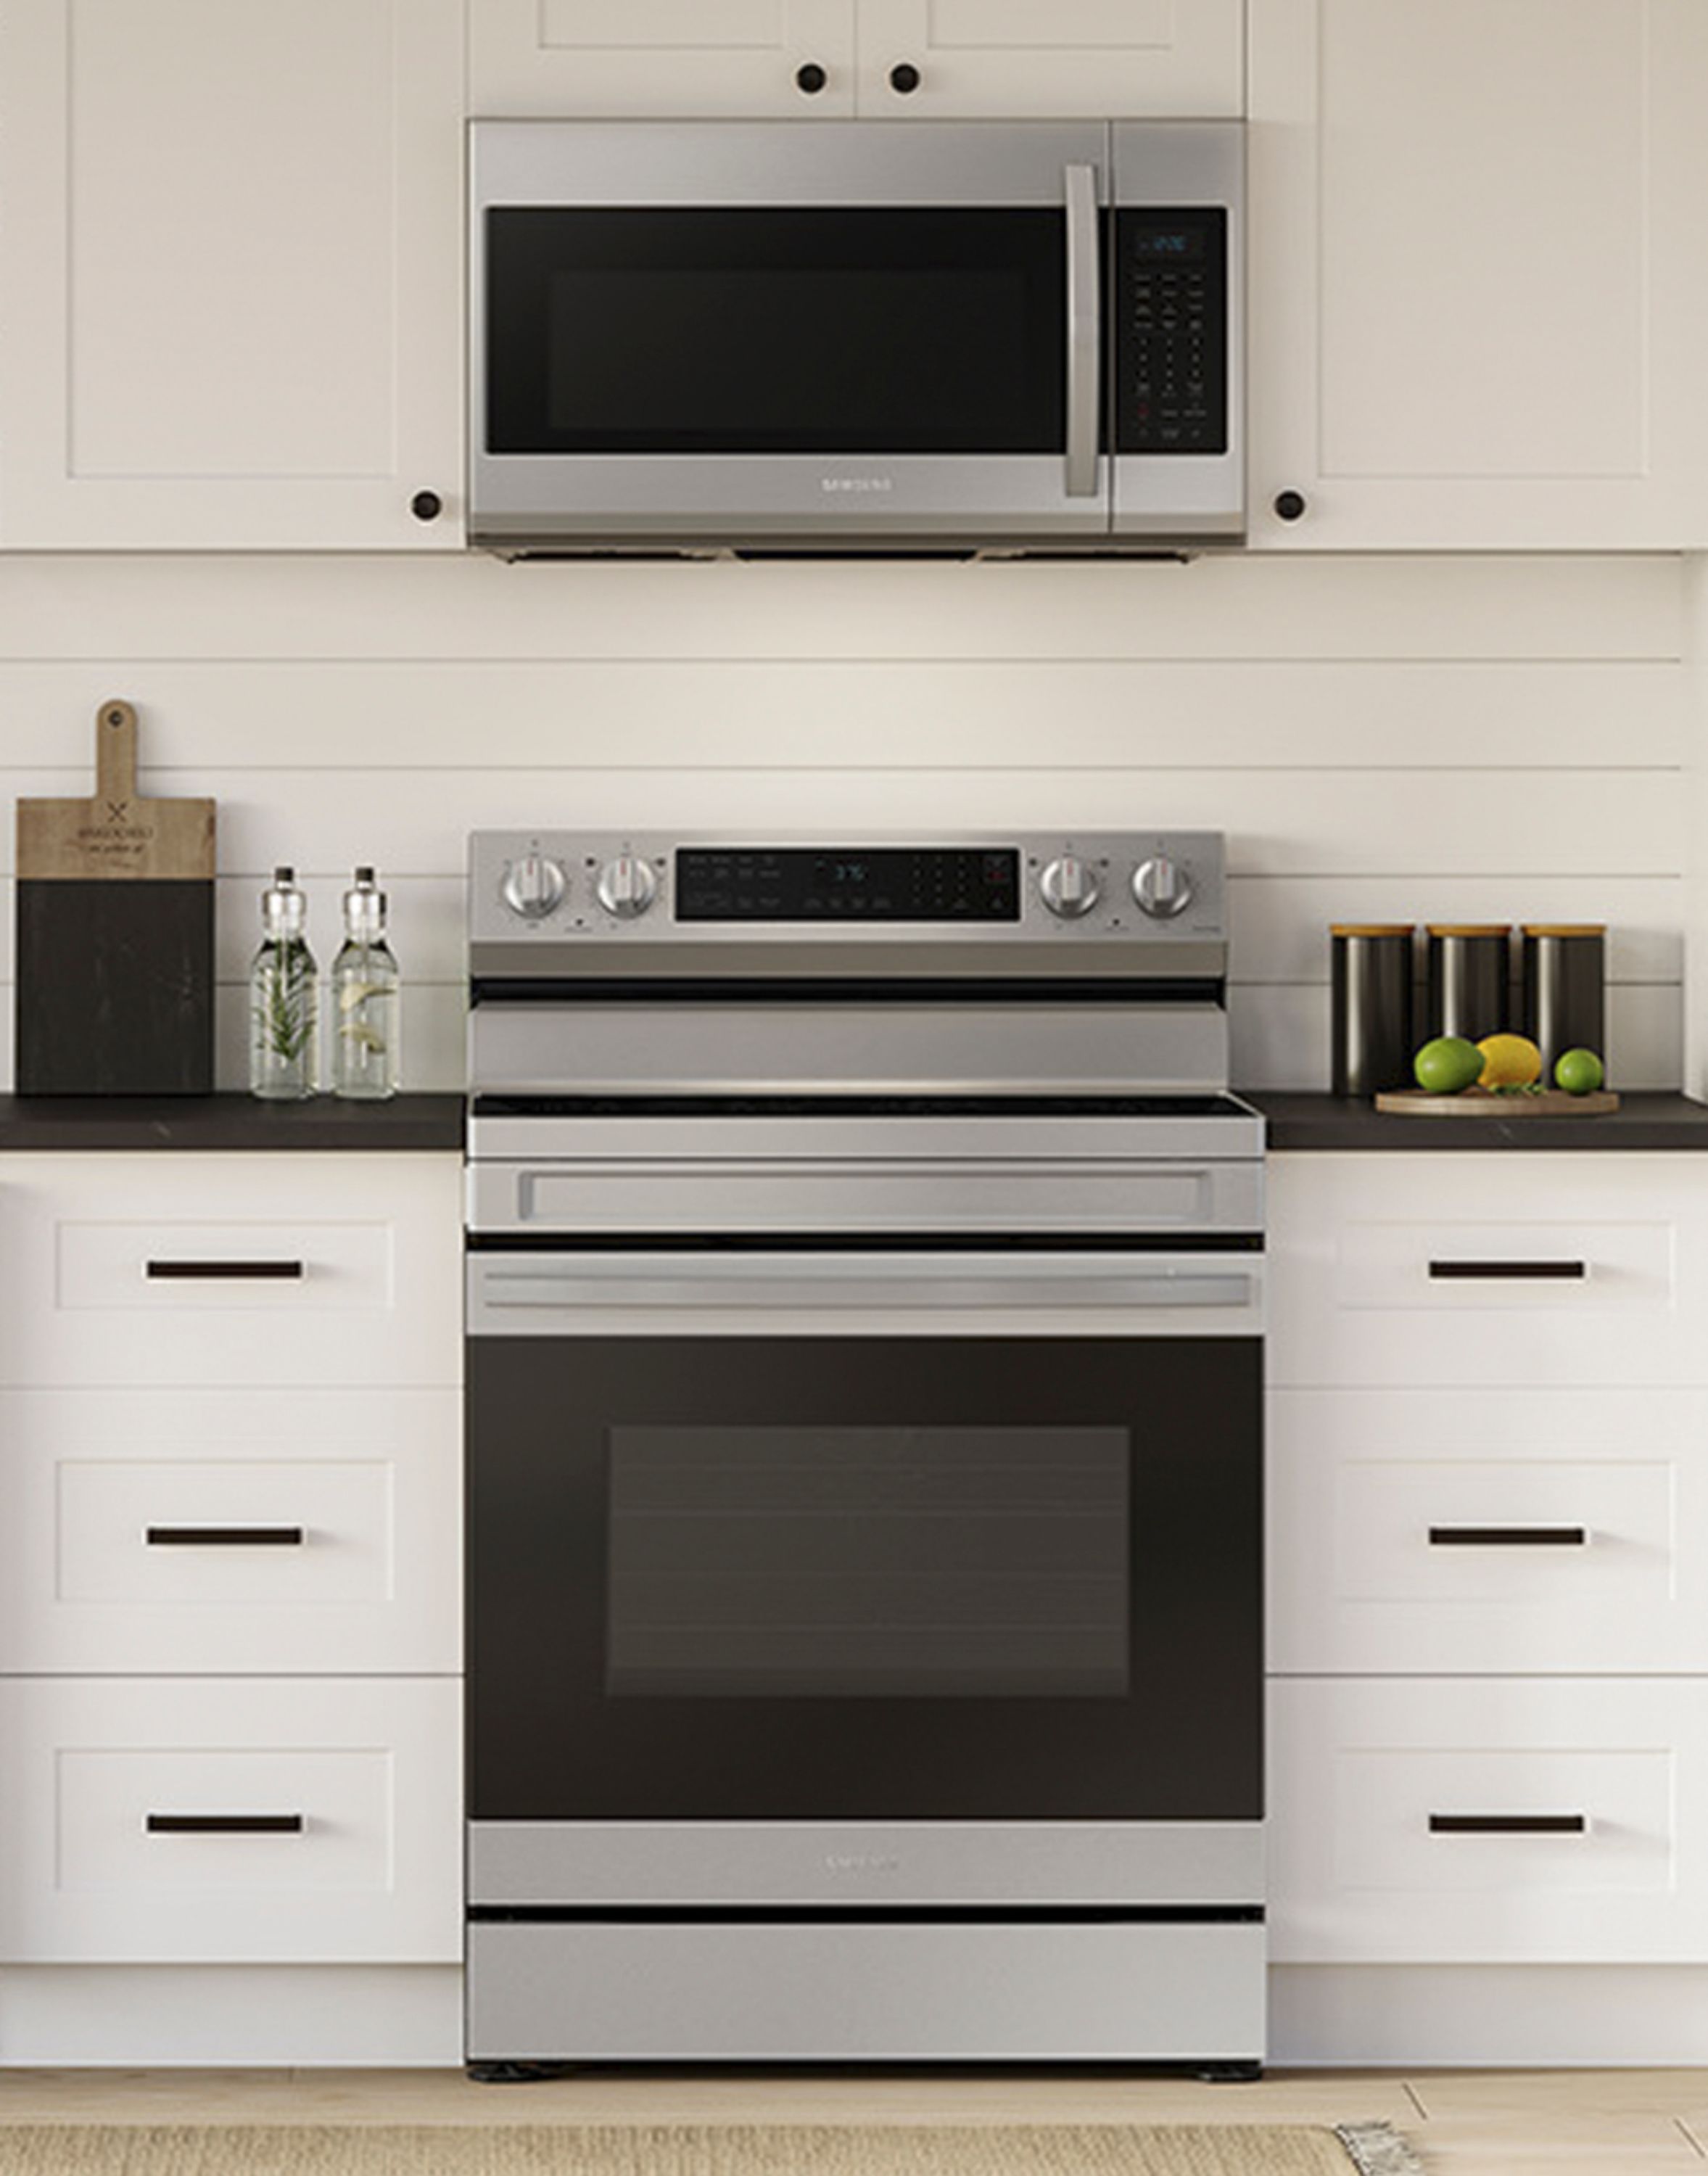 Samsung 6.3 cu. ft. Freestanding Electric Range with WiFi and